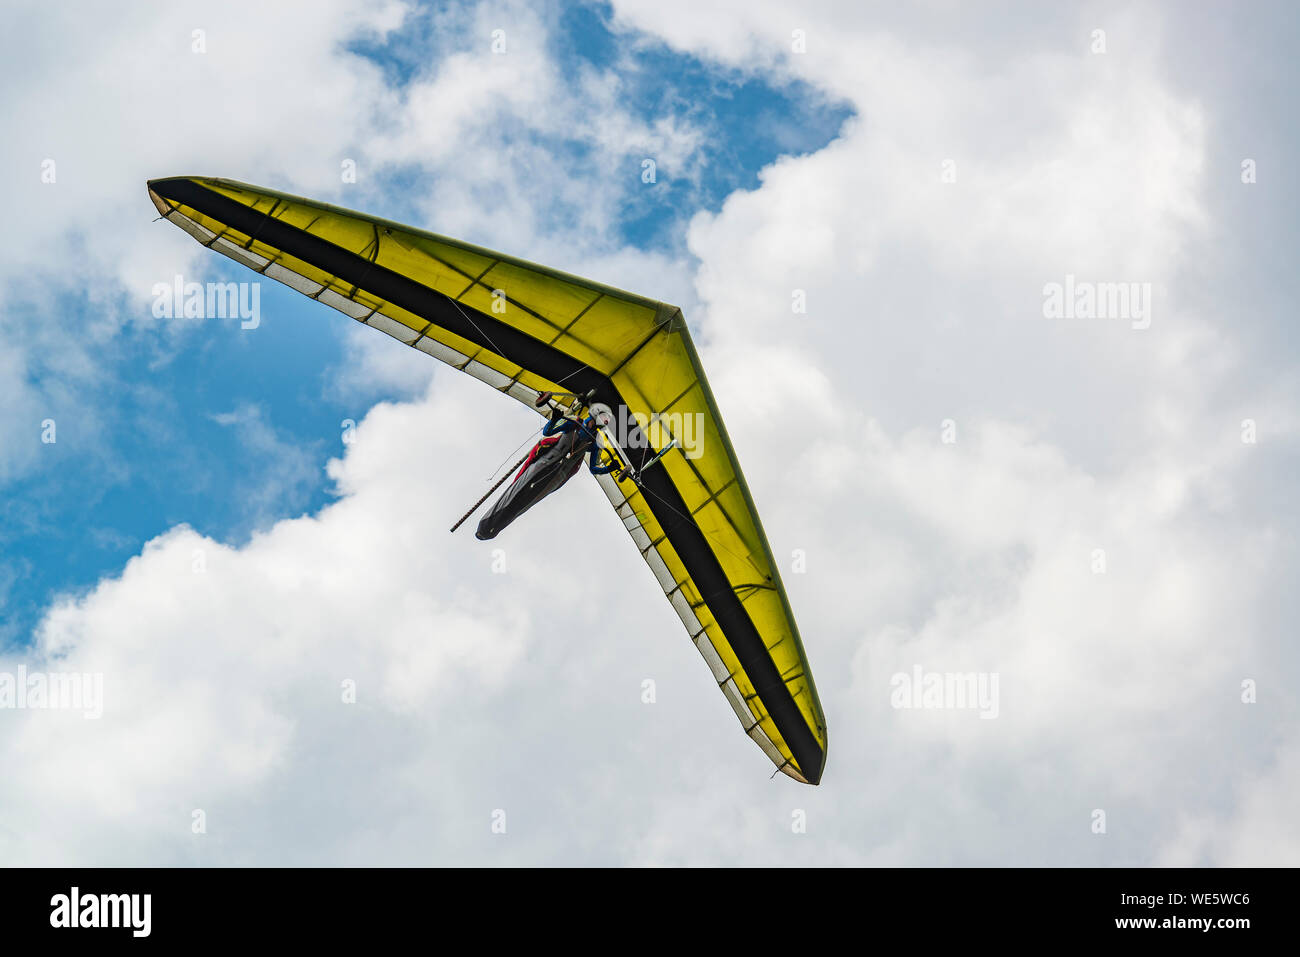 Yellow hang glider wing with cloudy sky on the background. Hangglider pilot and his aircraft. Stock Photo